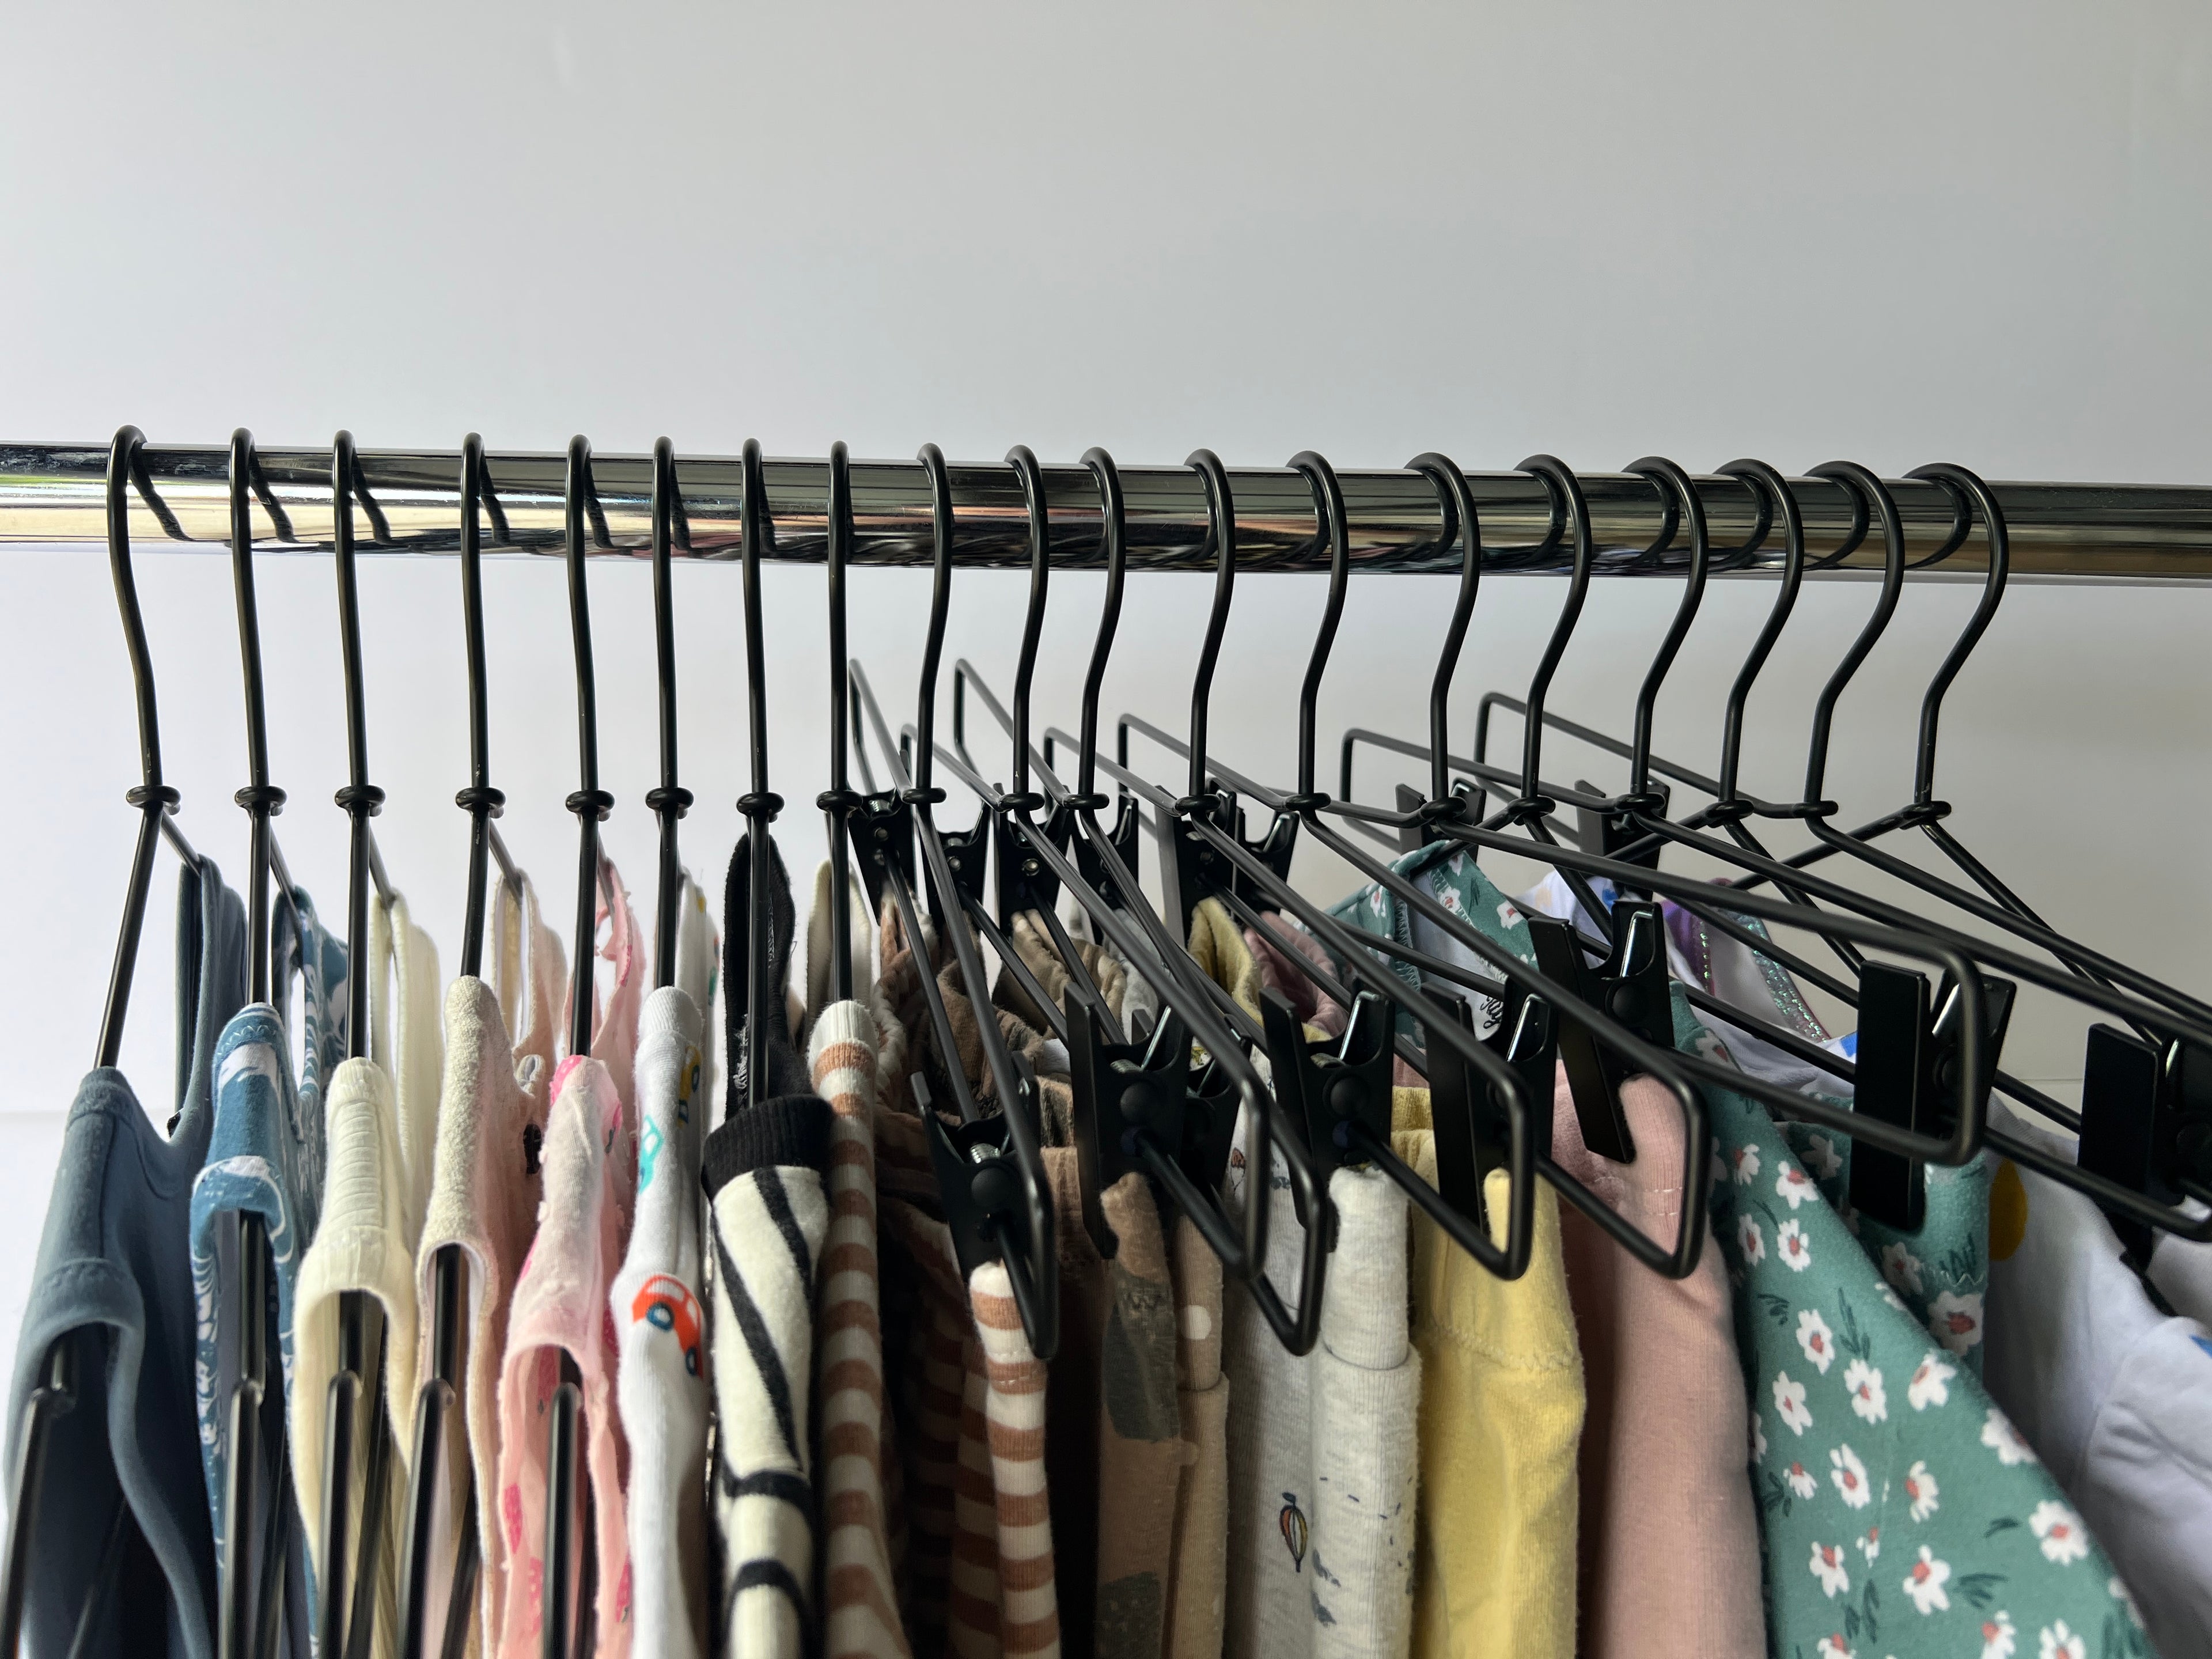 On a silver rack hangs 19 hangers of sewn kids clothing items: tank tops, dresses, t-shirts, long sleeve sweaters, shorts, leggings, joggers, and swimwear.